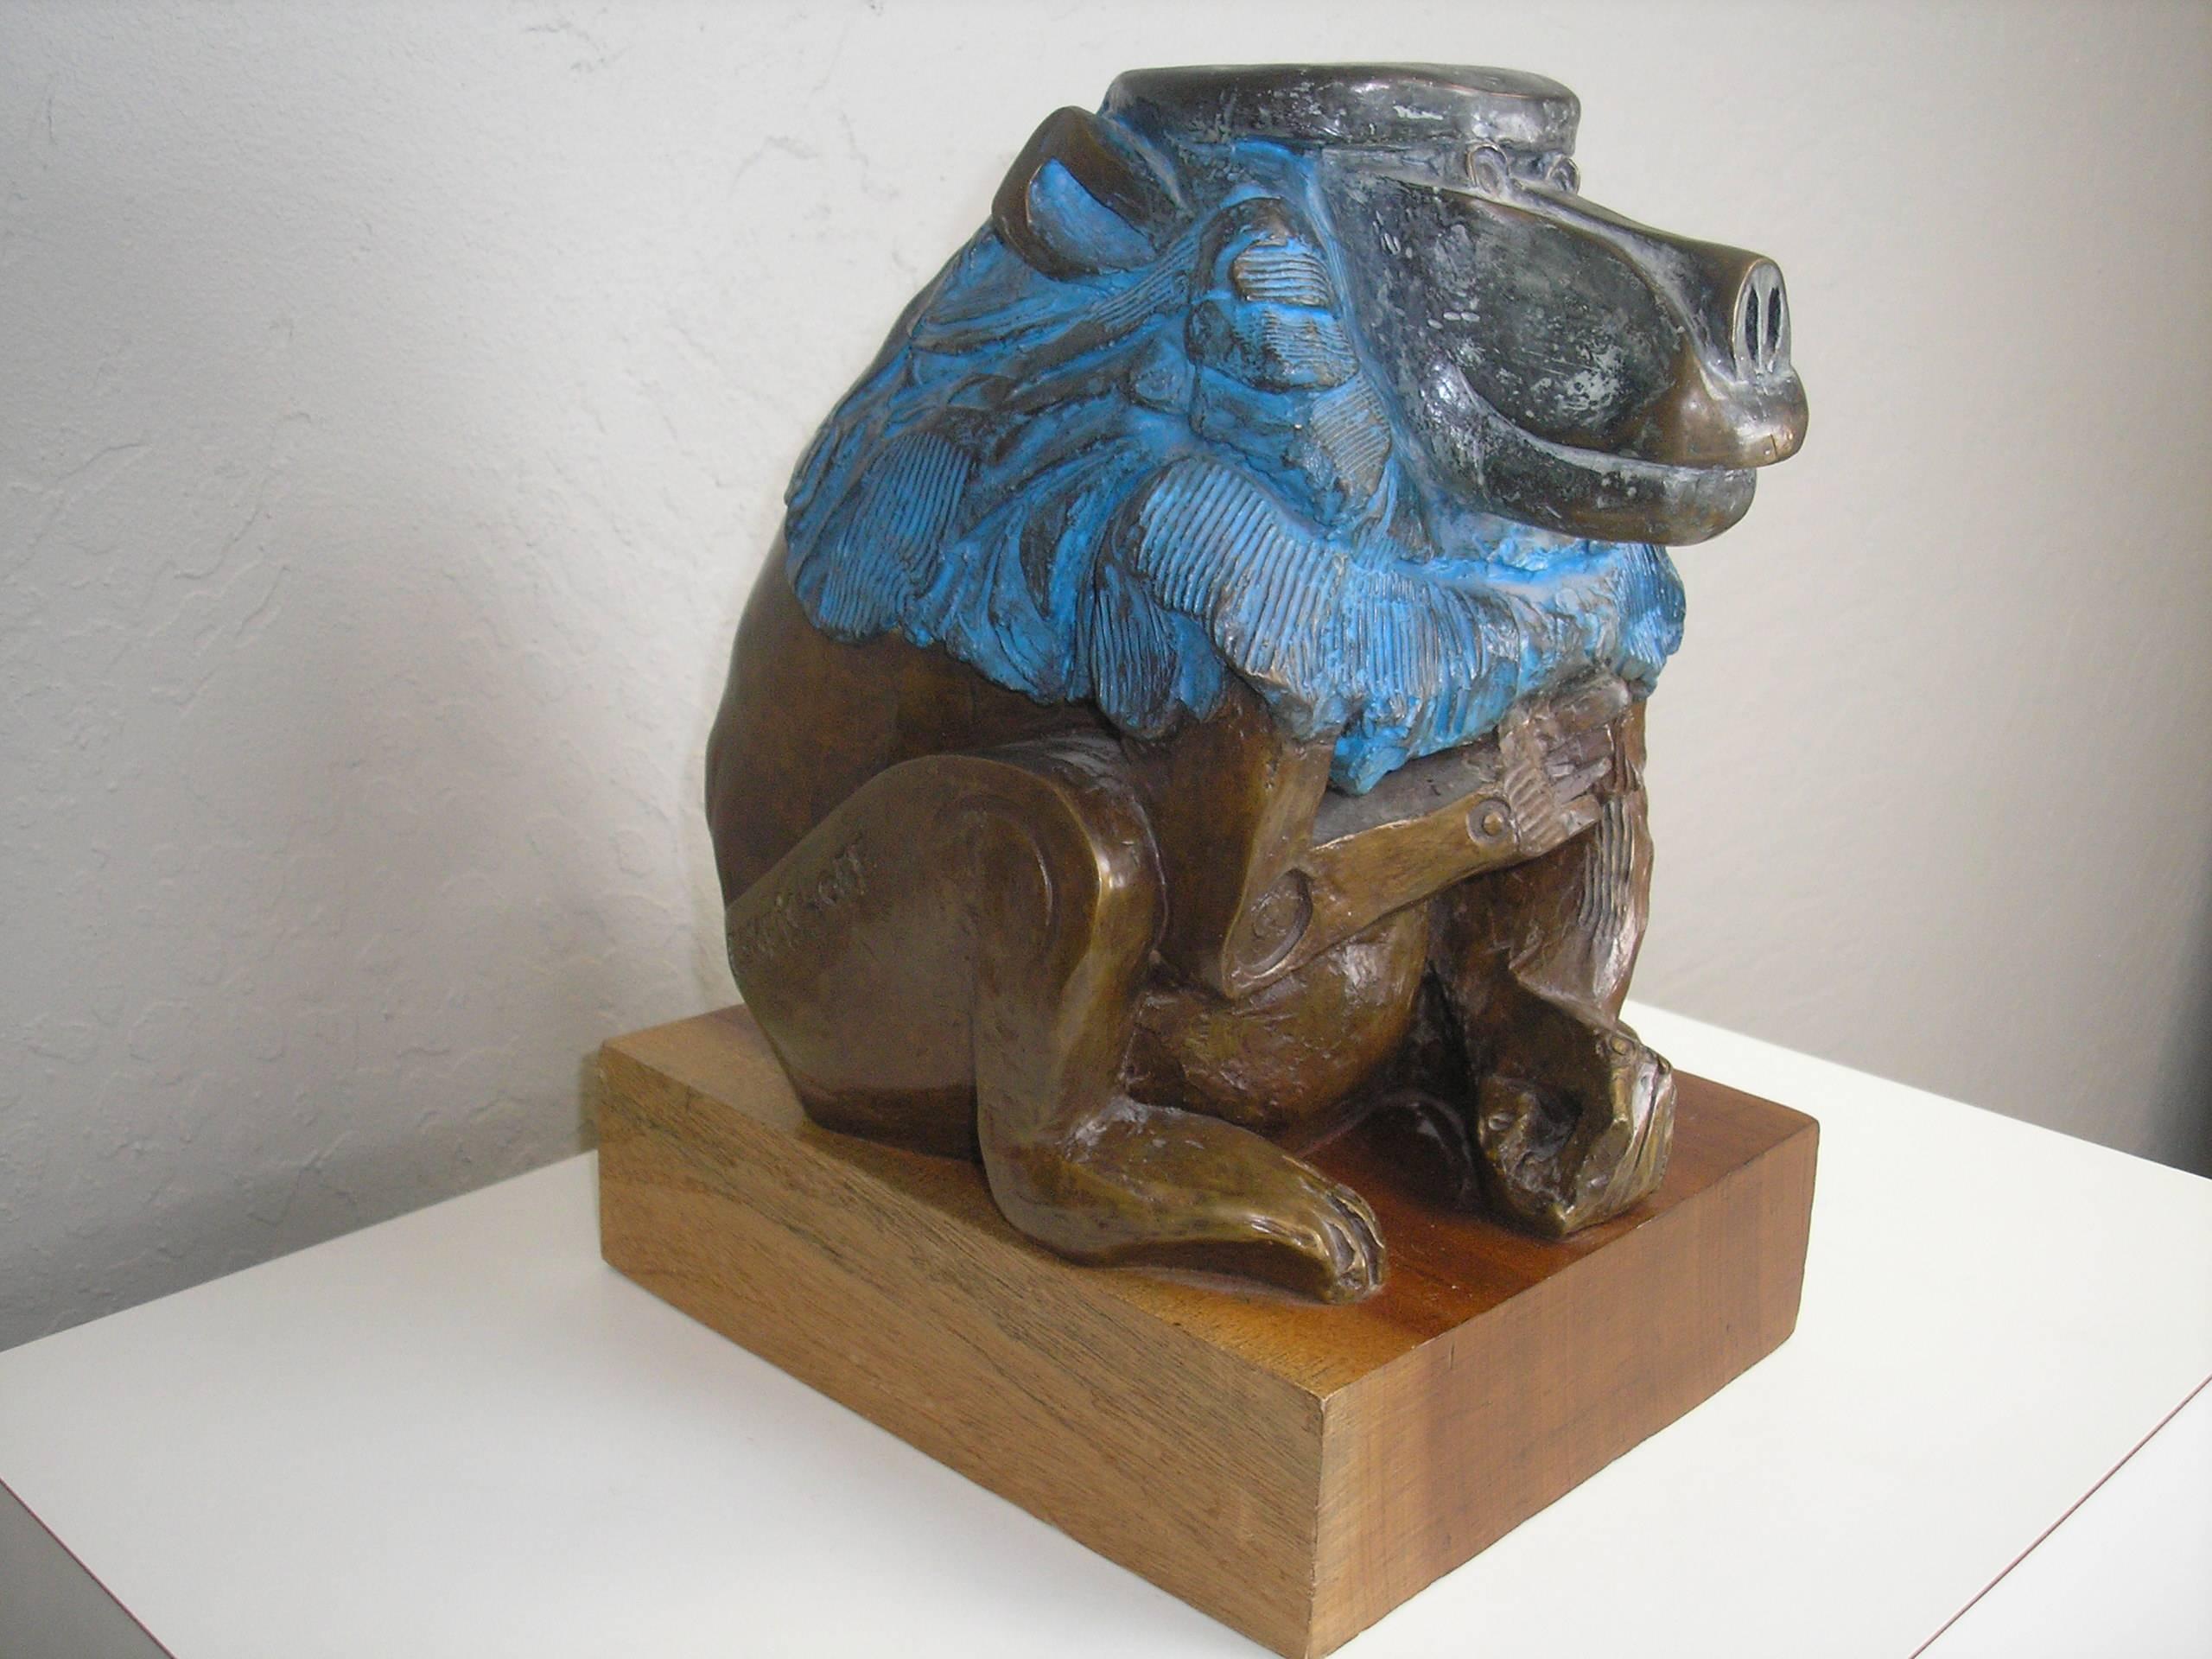 This bronze baboon was sculpted by Eleizer Weishoff, circa 1970. Numbered 16 out of 99. The back is blue tinted and a red tinted buttocks. It is mounted on a 3